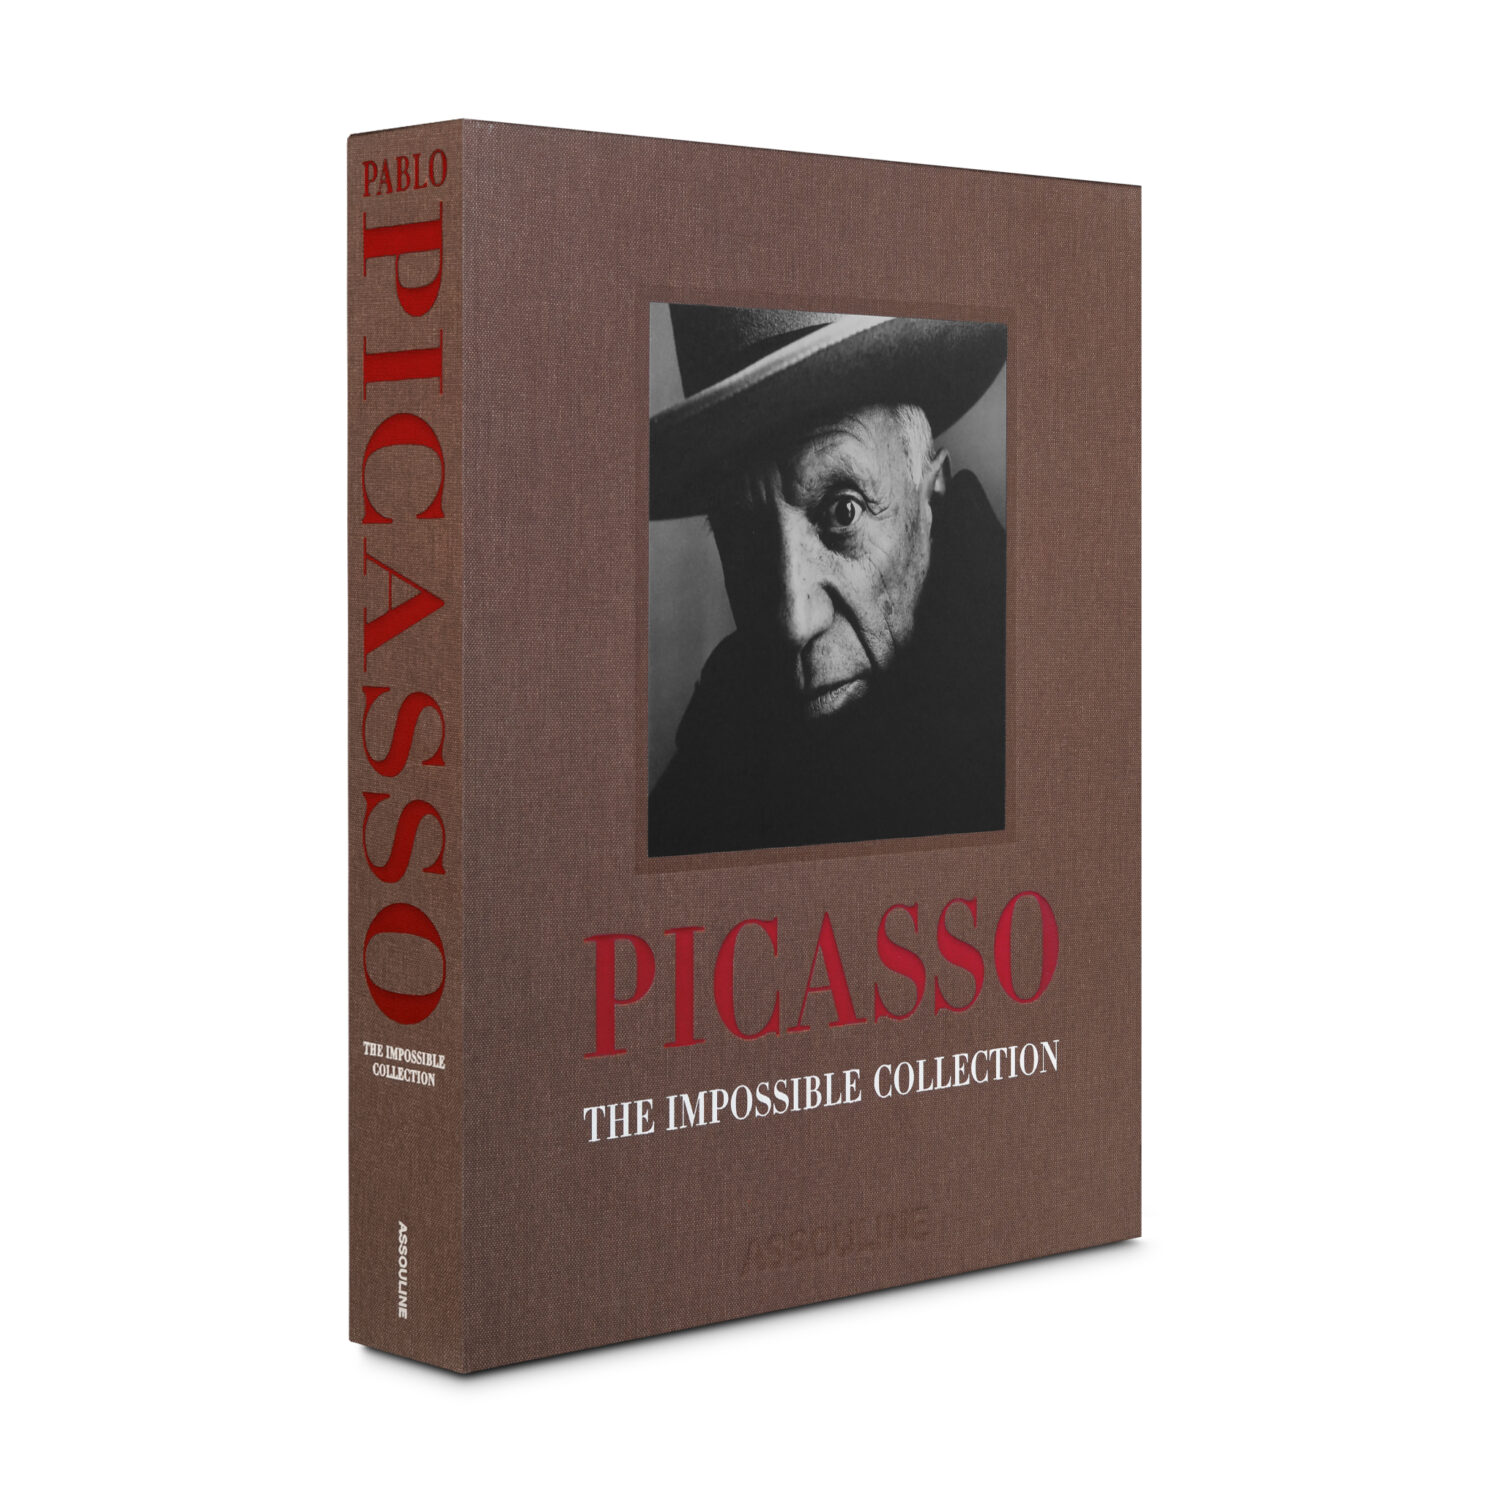 Pablo Picasso The Impossible Collection, assouline.com